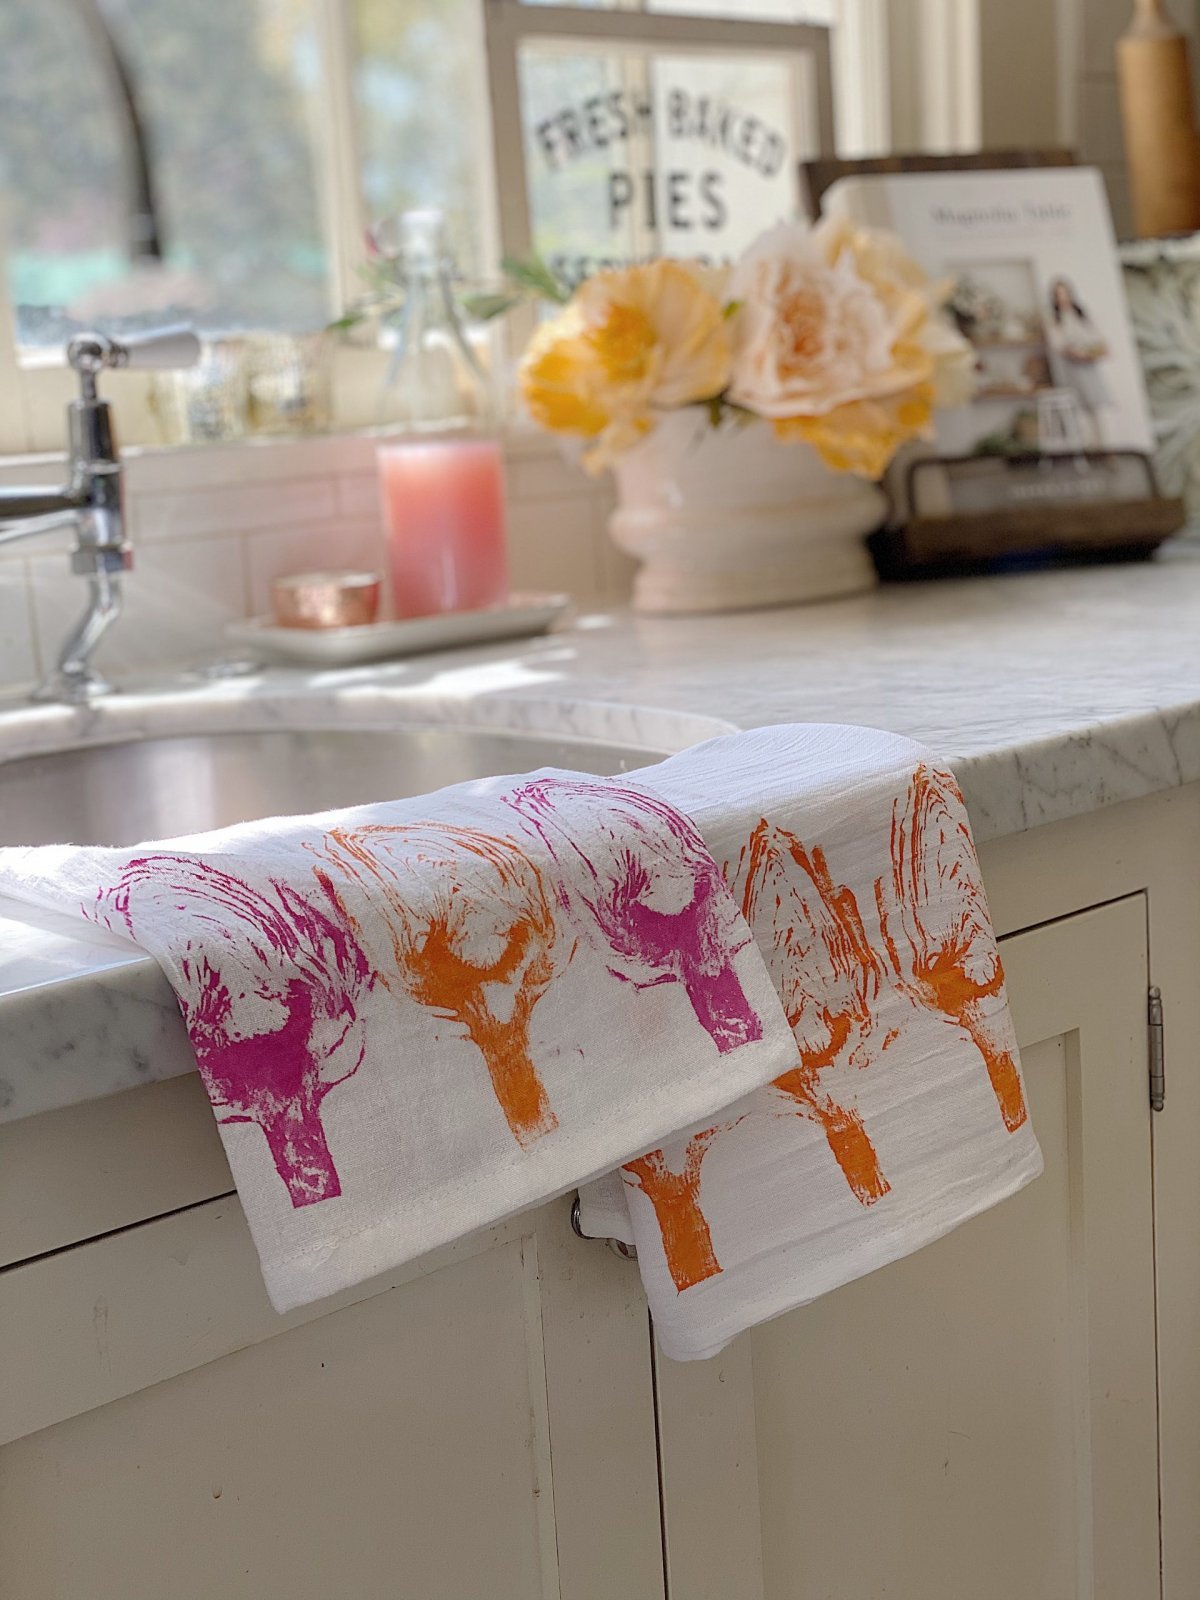 Stamping Tea Towels with Fruit: 7 Steps for an Easy Kitchen DIY